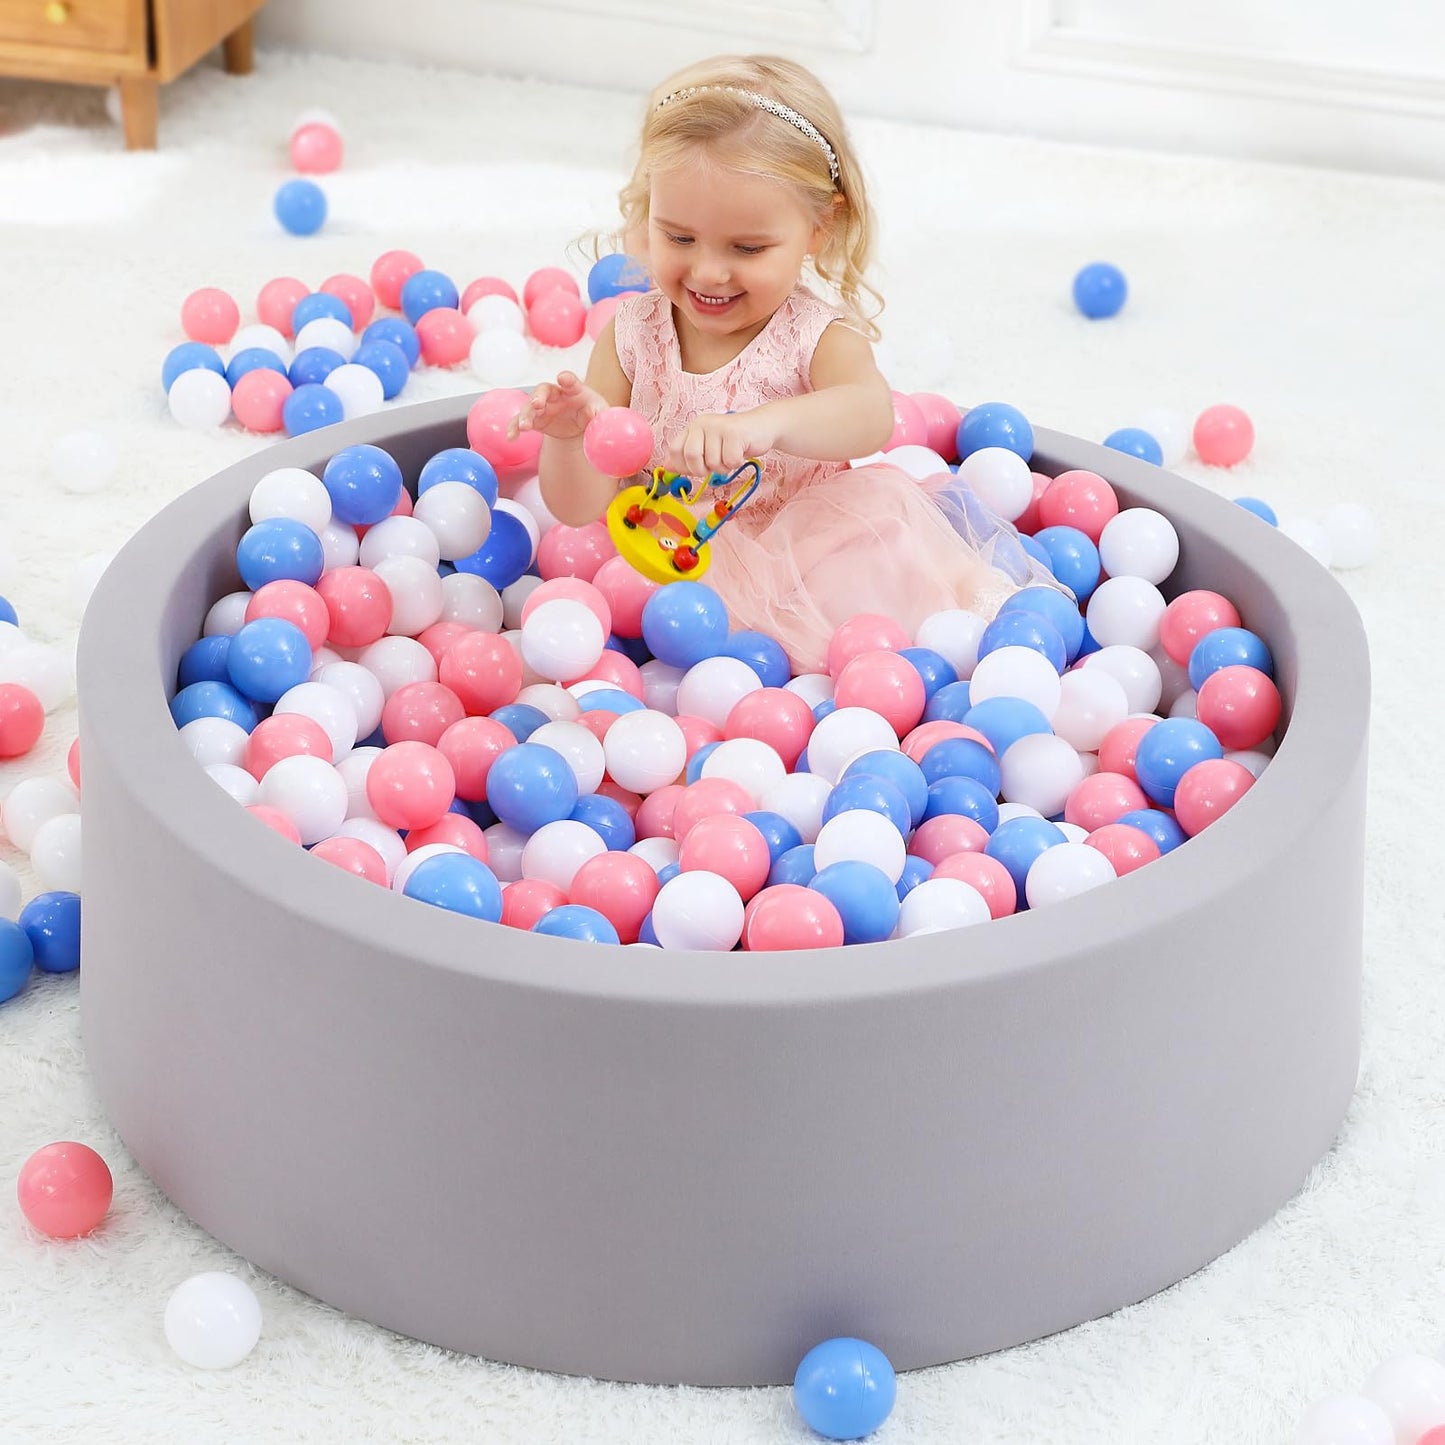 Wilwolfer Foam Ball Pit for Toddlers, Large Baby Ball Pit for Babies with Soft Memory Sponge, Indoor Outdoor Baby Playpen, Kids Play Ball Pool, Gift Toys for Infants Boys and Girls (Gray, NO Balls)